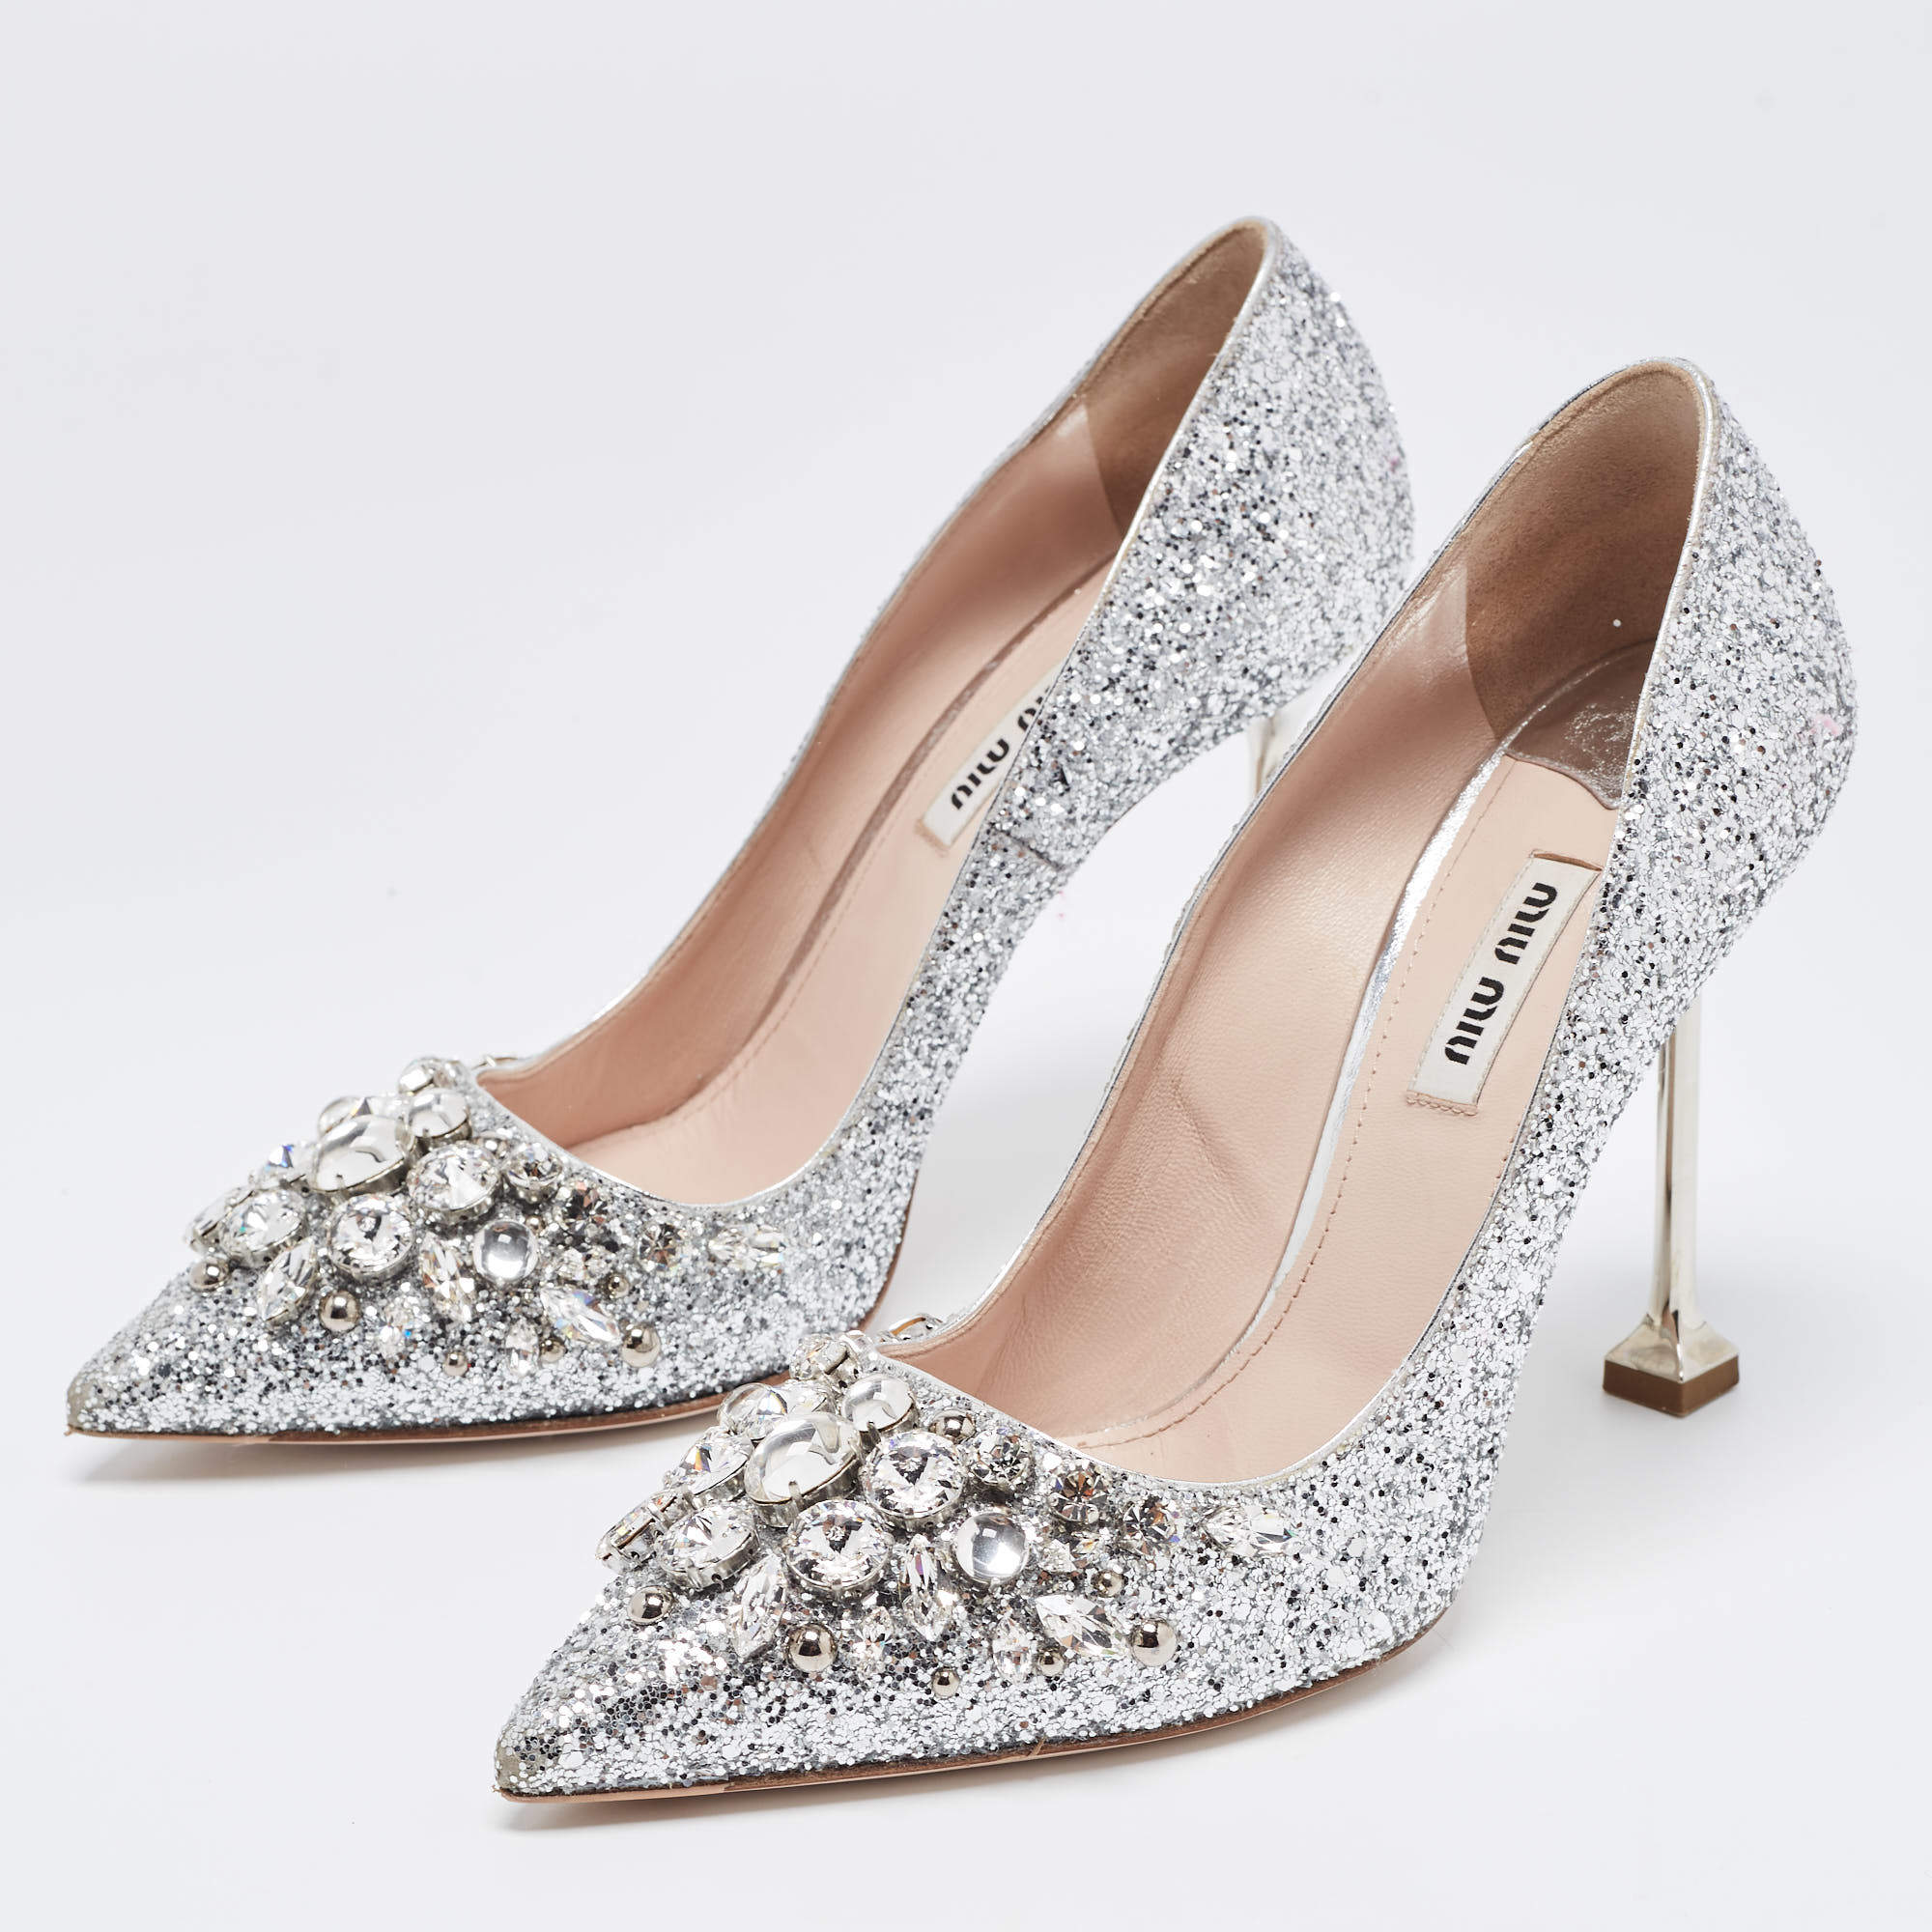 Miu Miu Silver Studded Glitter Crystal Embellished Pointed-Toe Pumps Size 38